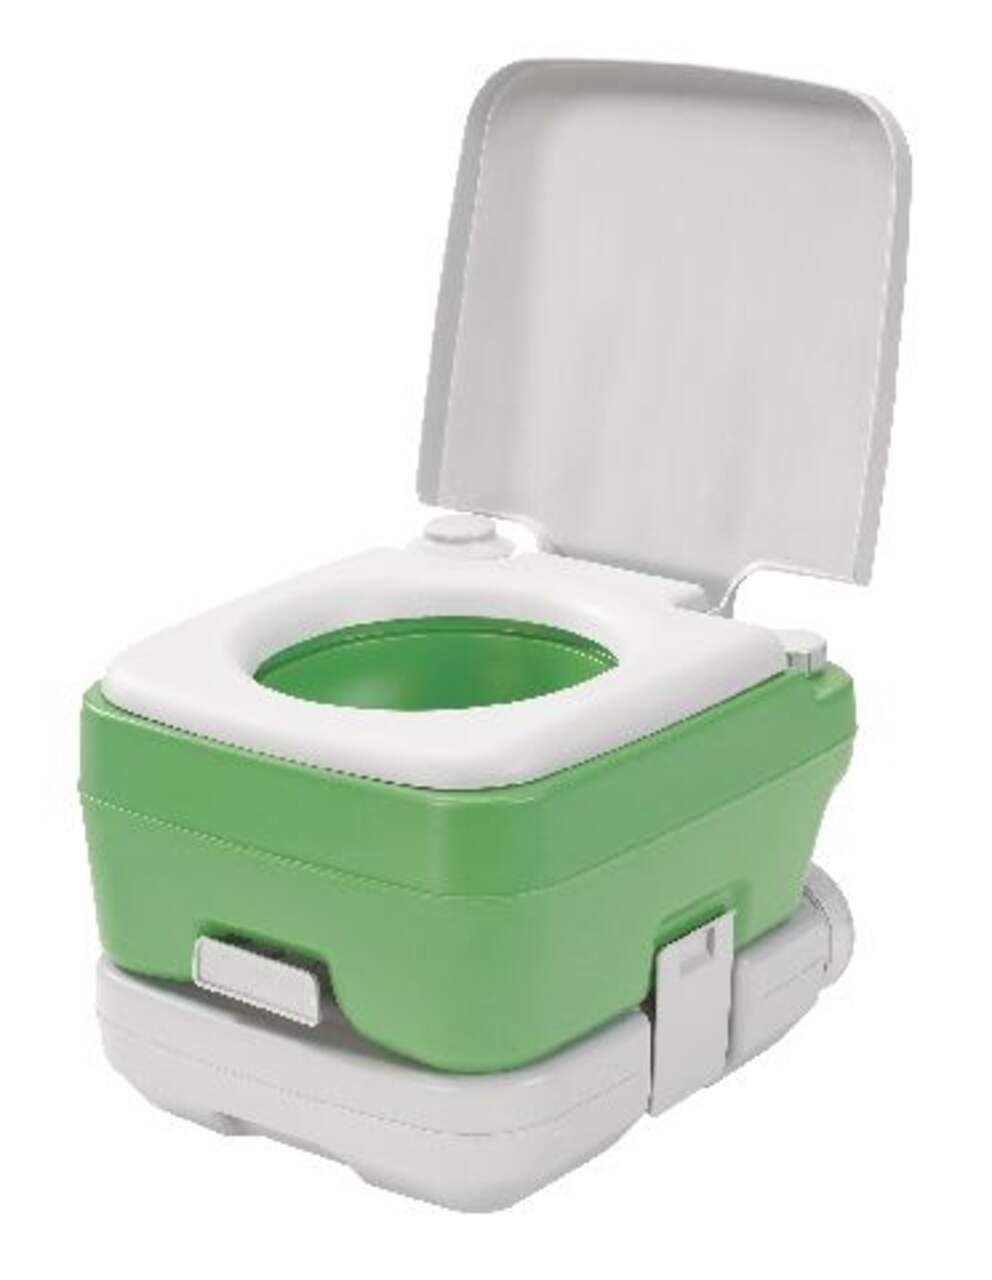 https://media-www.canadiantire.ca/product/playing/camping/camping-accessories/0760566/10l-portable-toilet-56989340-345e-4405-ba6a-377c0689ff96-jpgrendition.jpg?imdensity=1&imwidth=640&impolicy=mZoom